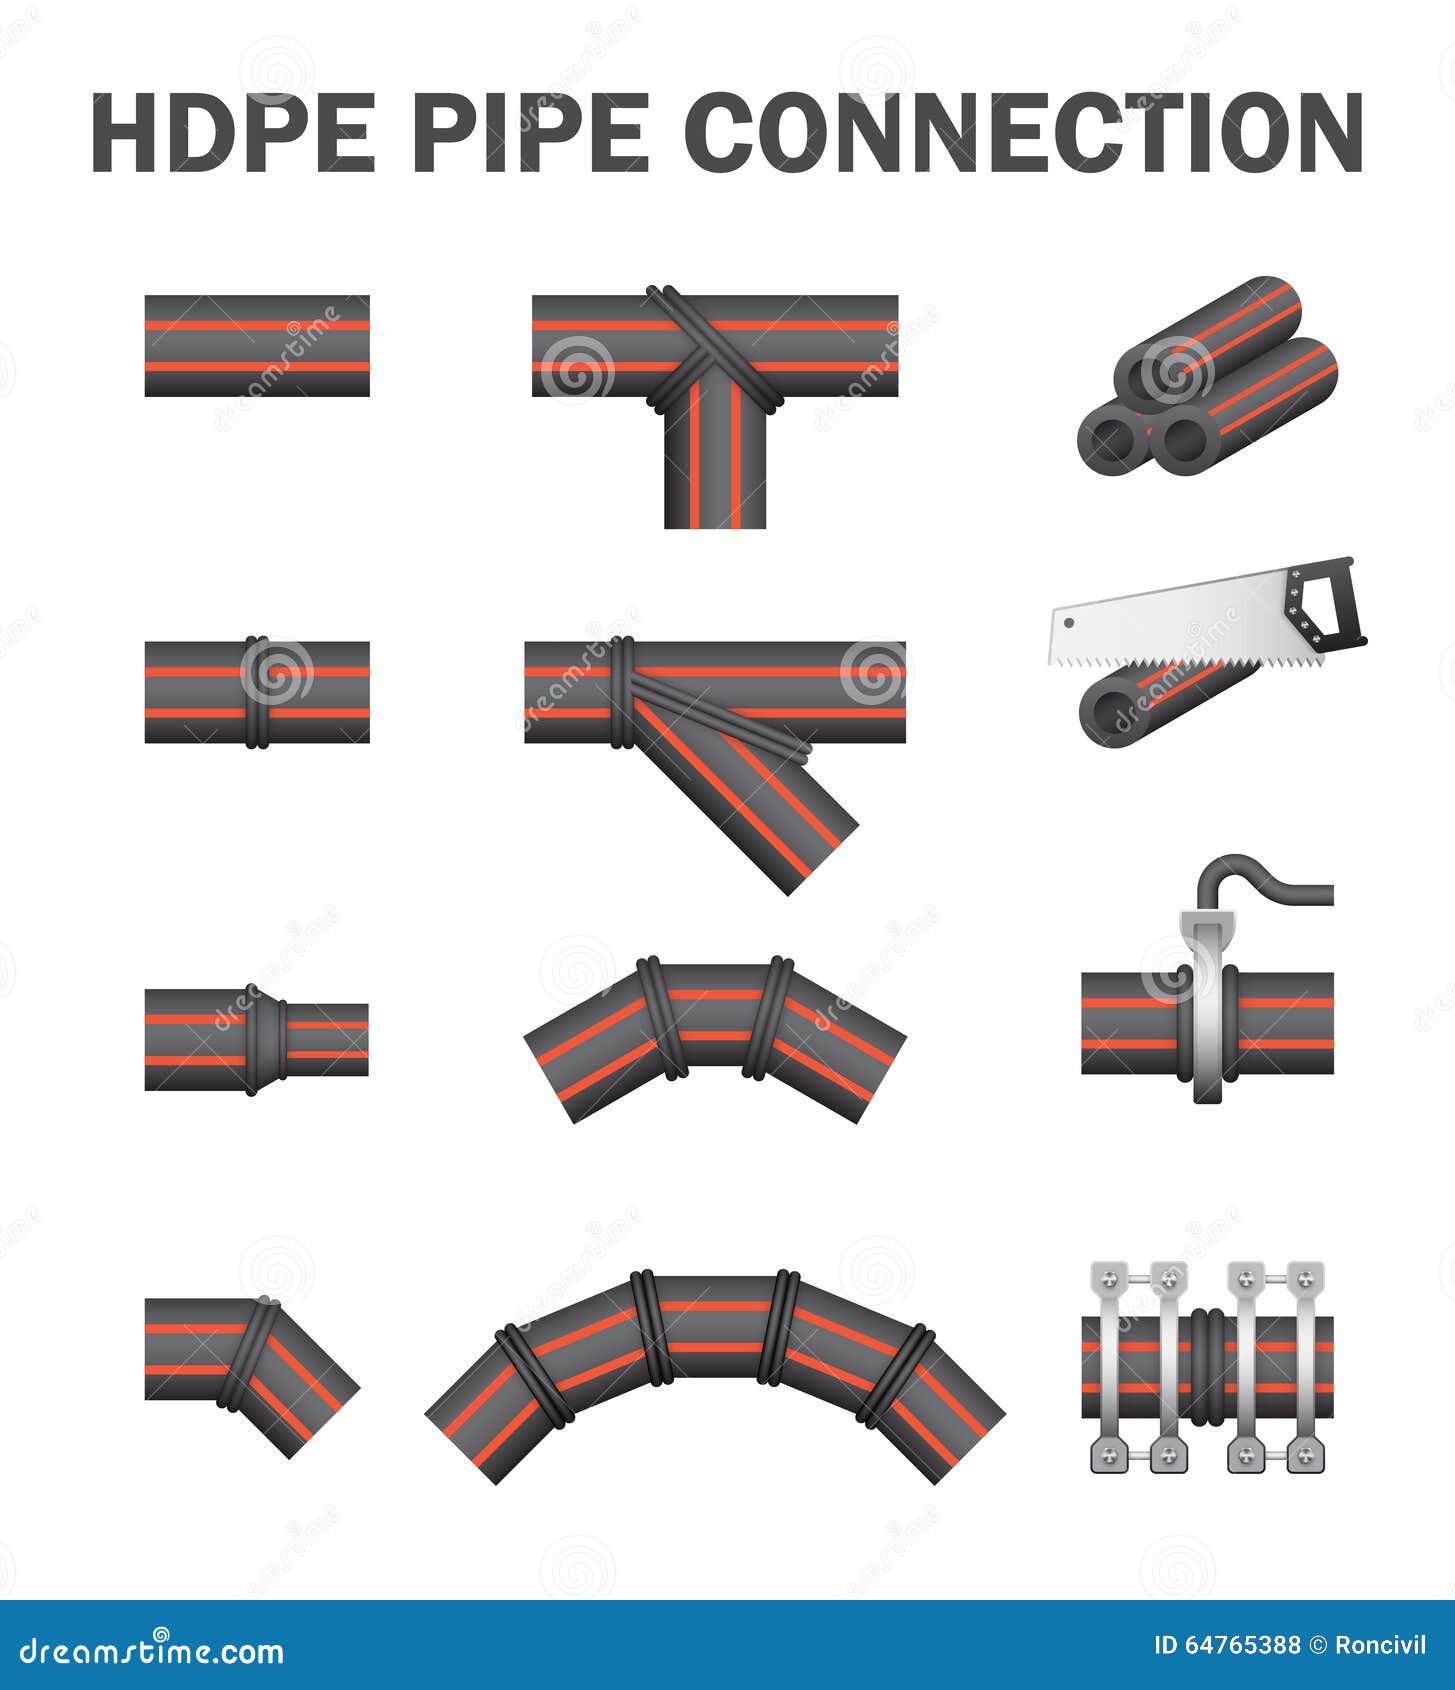 hdpe pipe connect